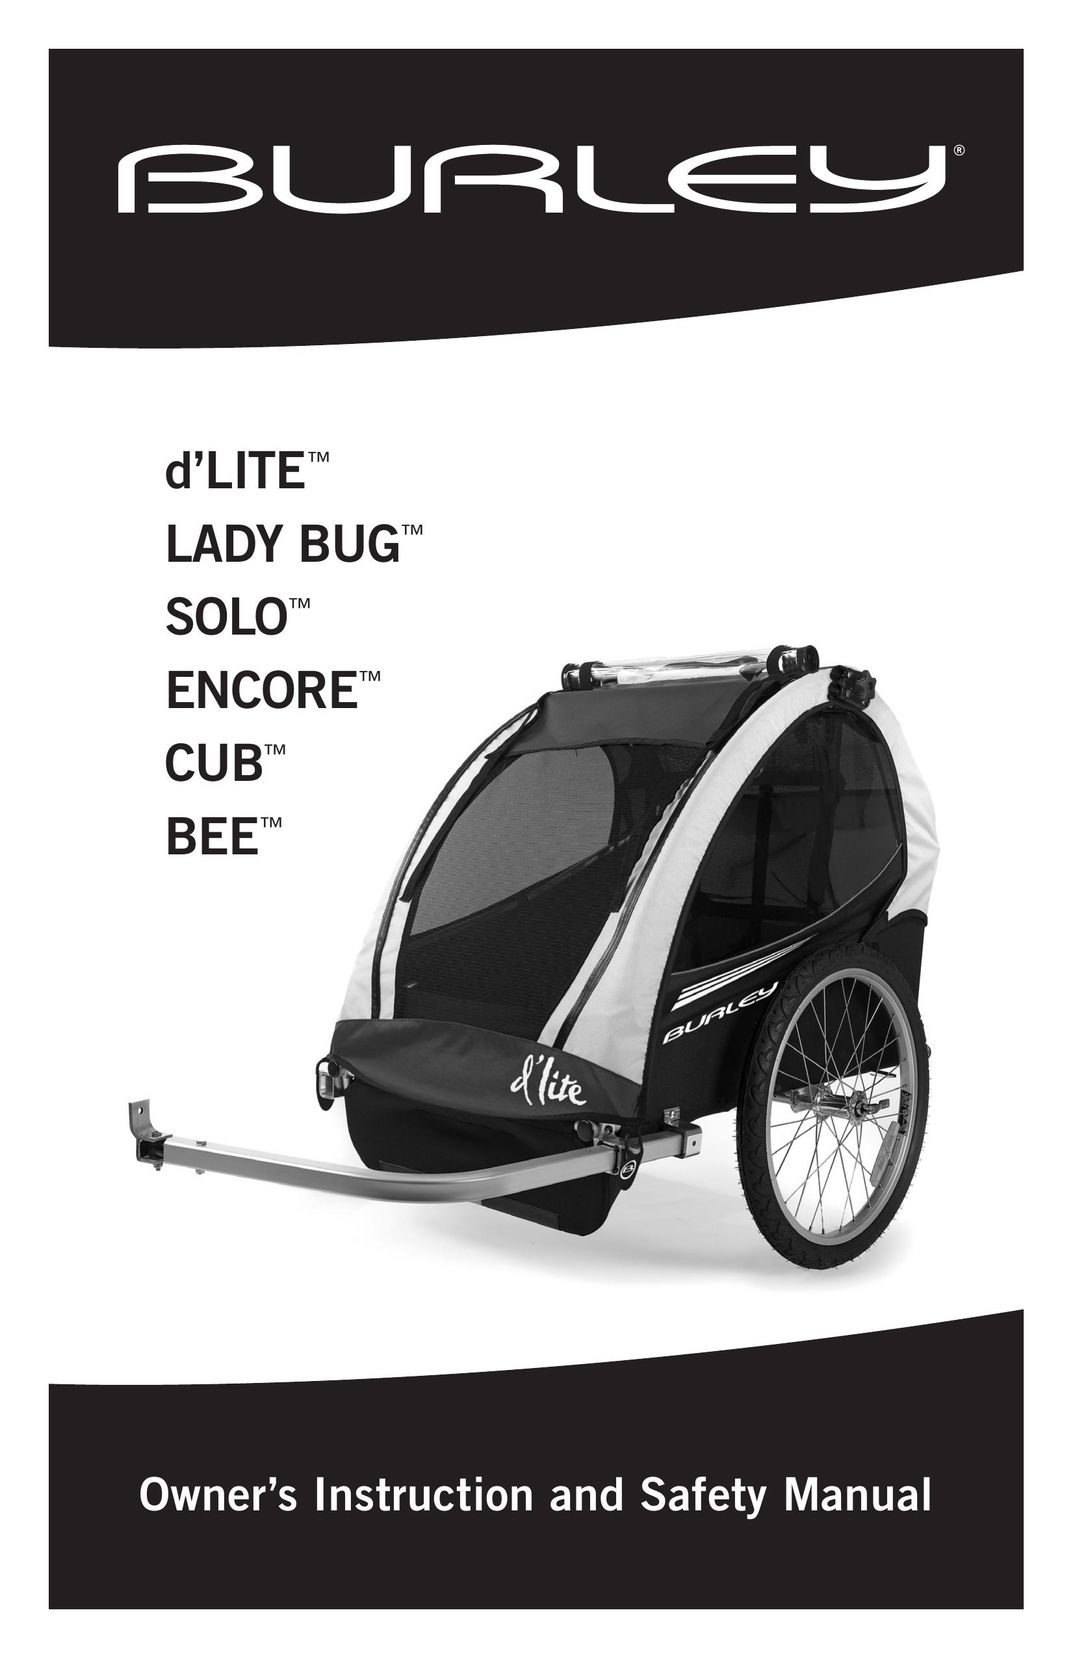 Burley LADY BUG Bicycle Accessories User Manual